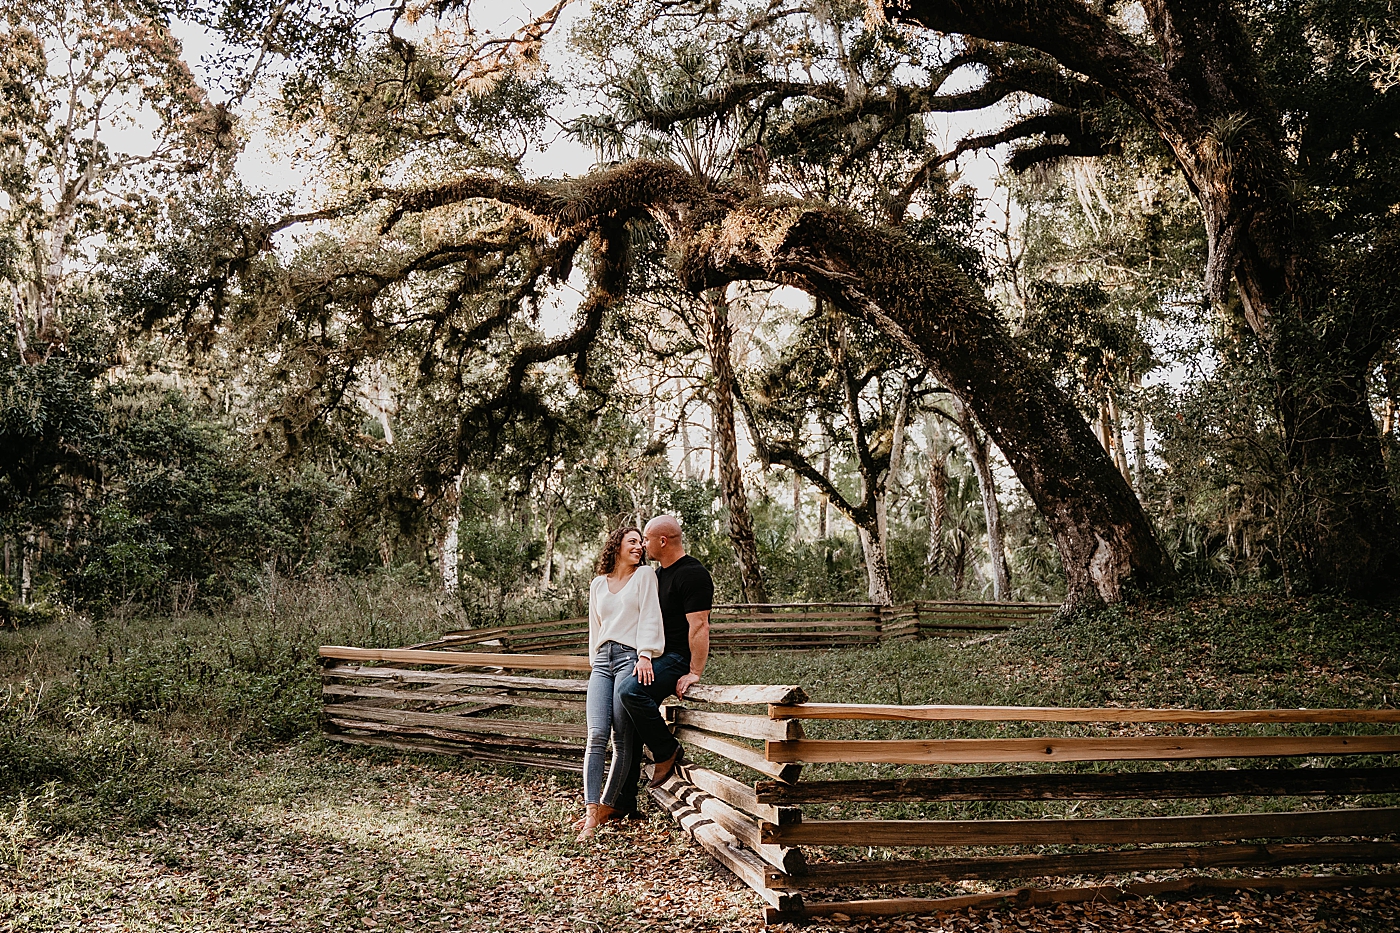 Couple leaning on wood fence with large spanish moss trees Romantic Riverbend Park Engagement Photography captured by South Florida Photographer Krystal Capone Photography